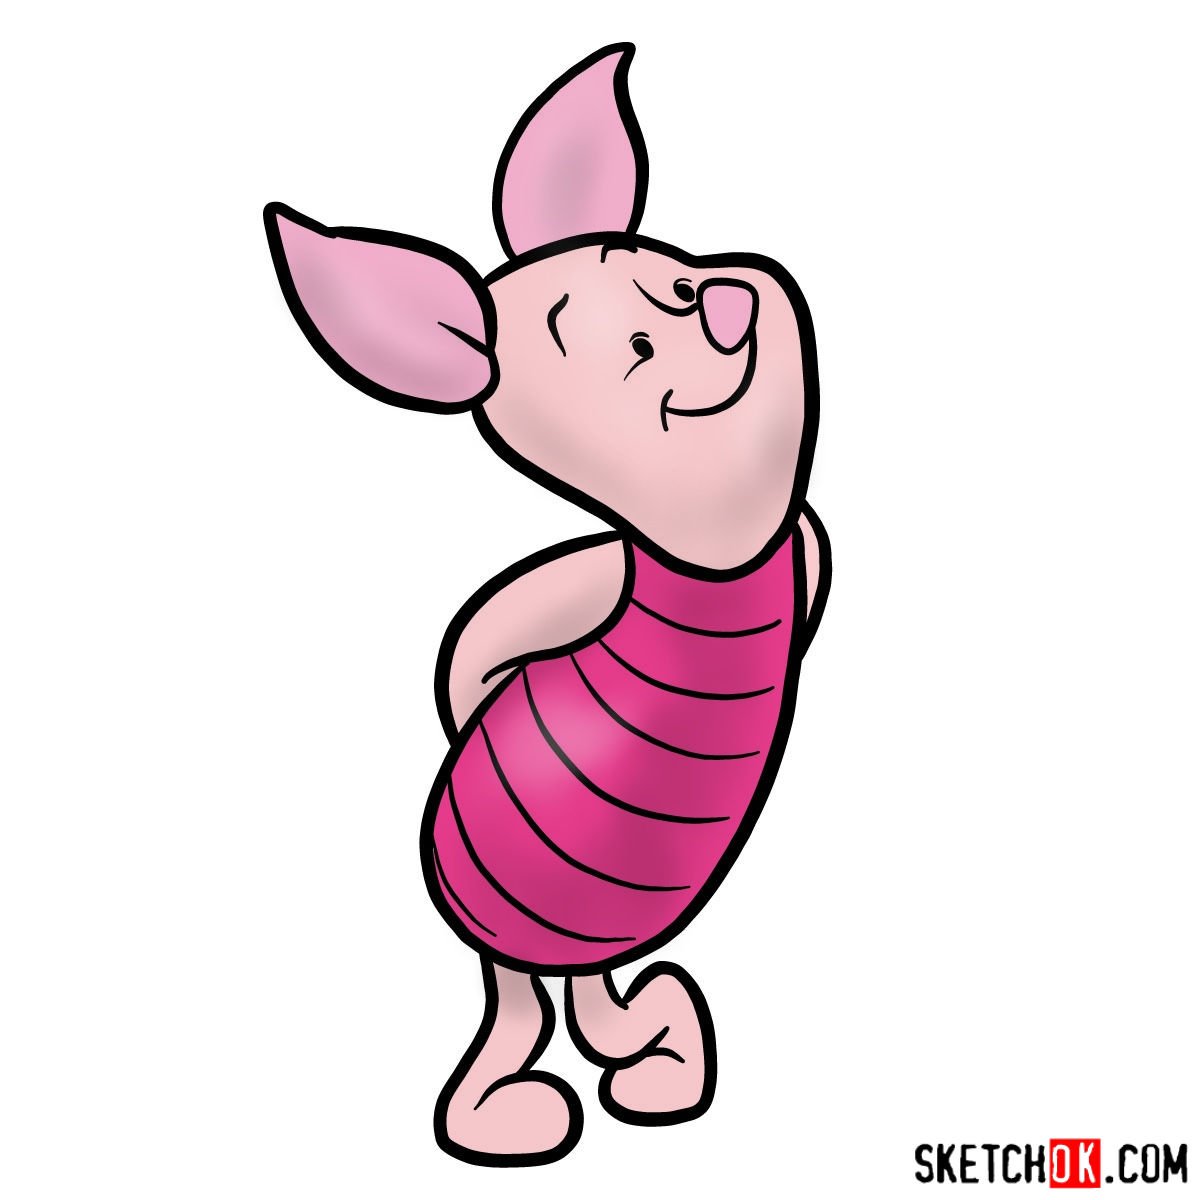 How to draw Piglet